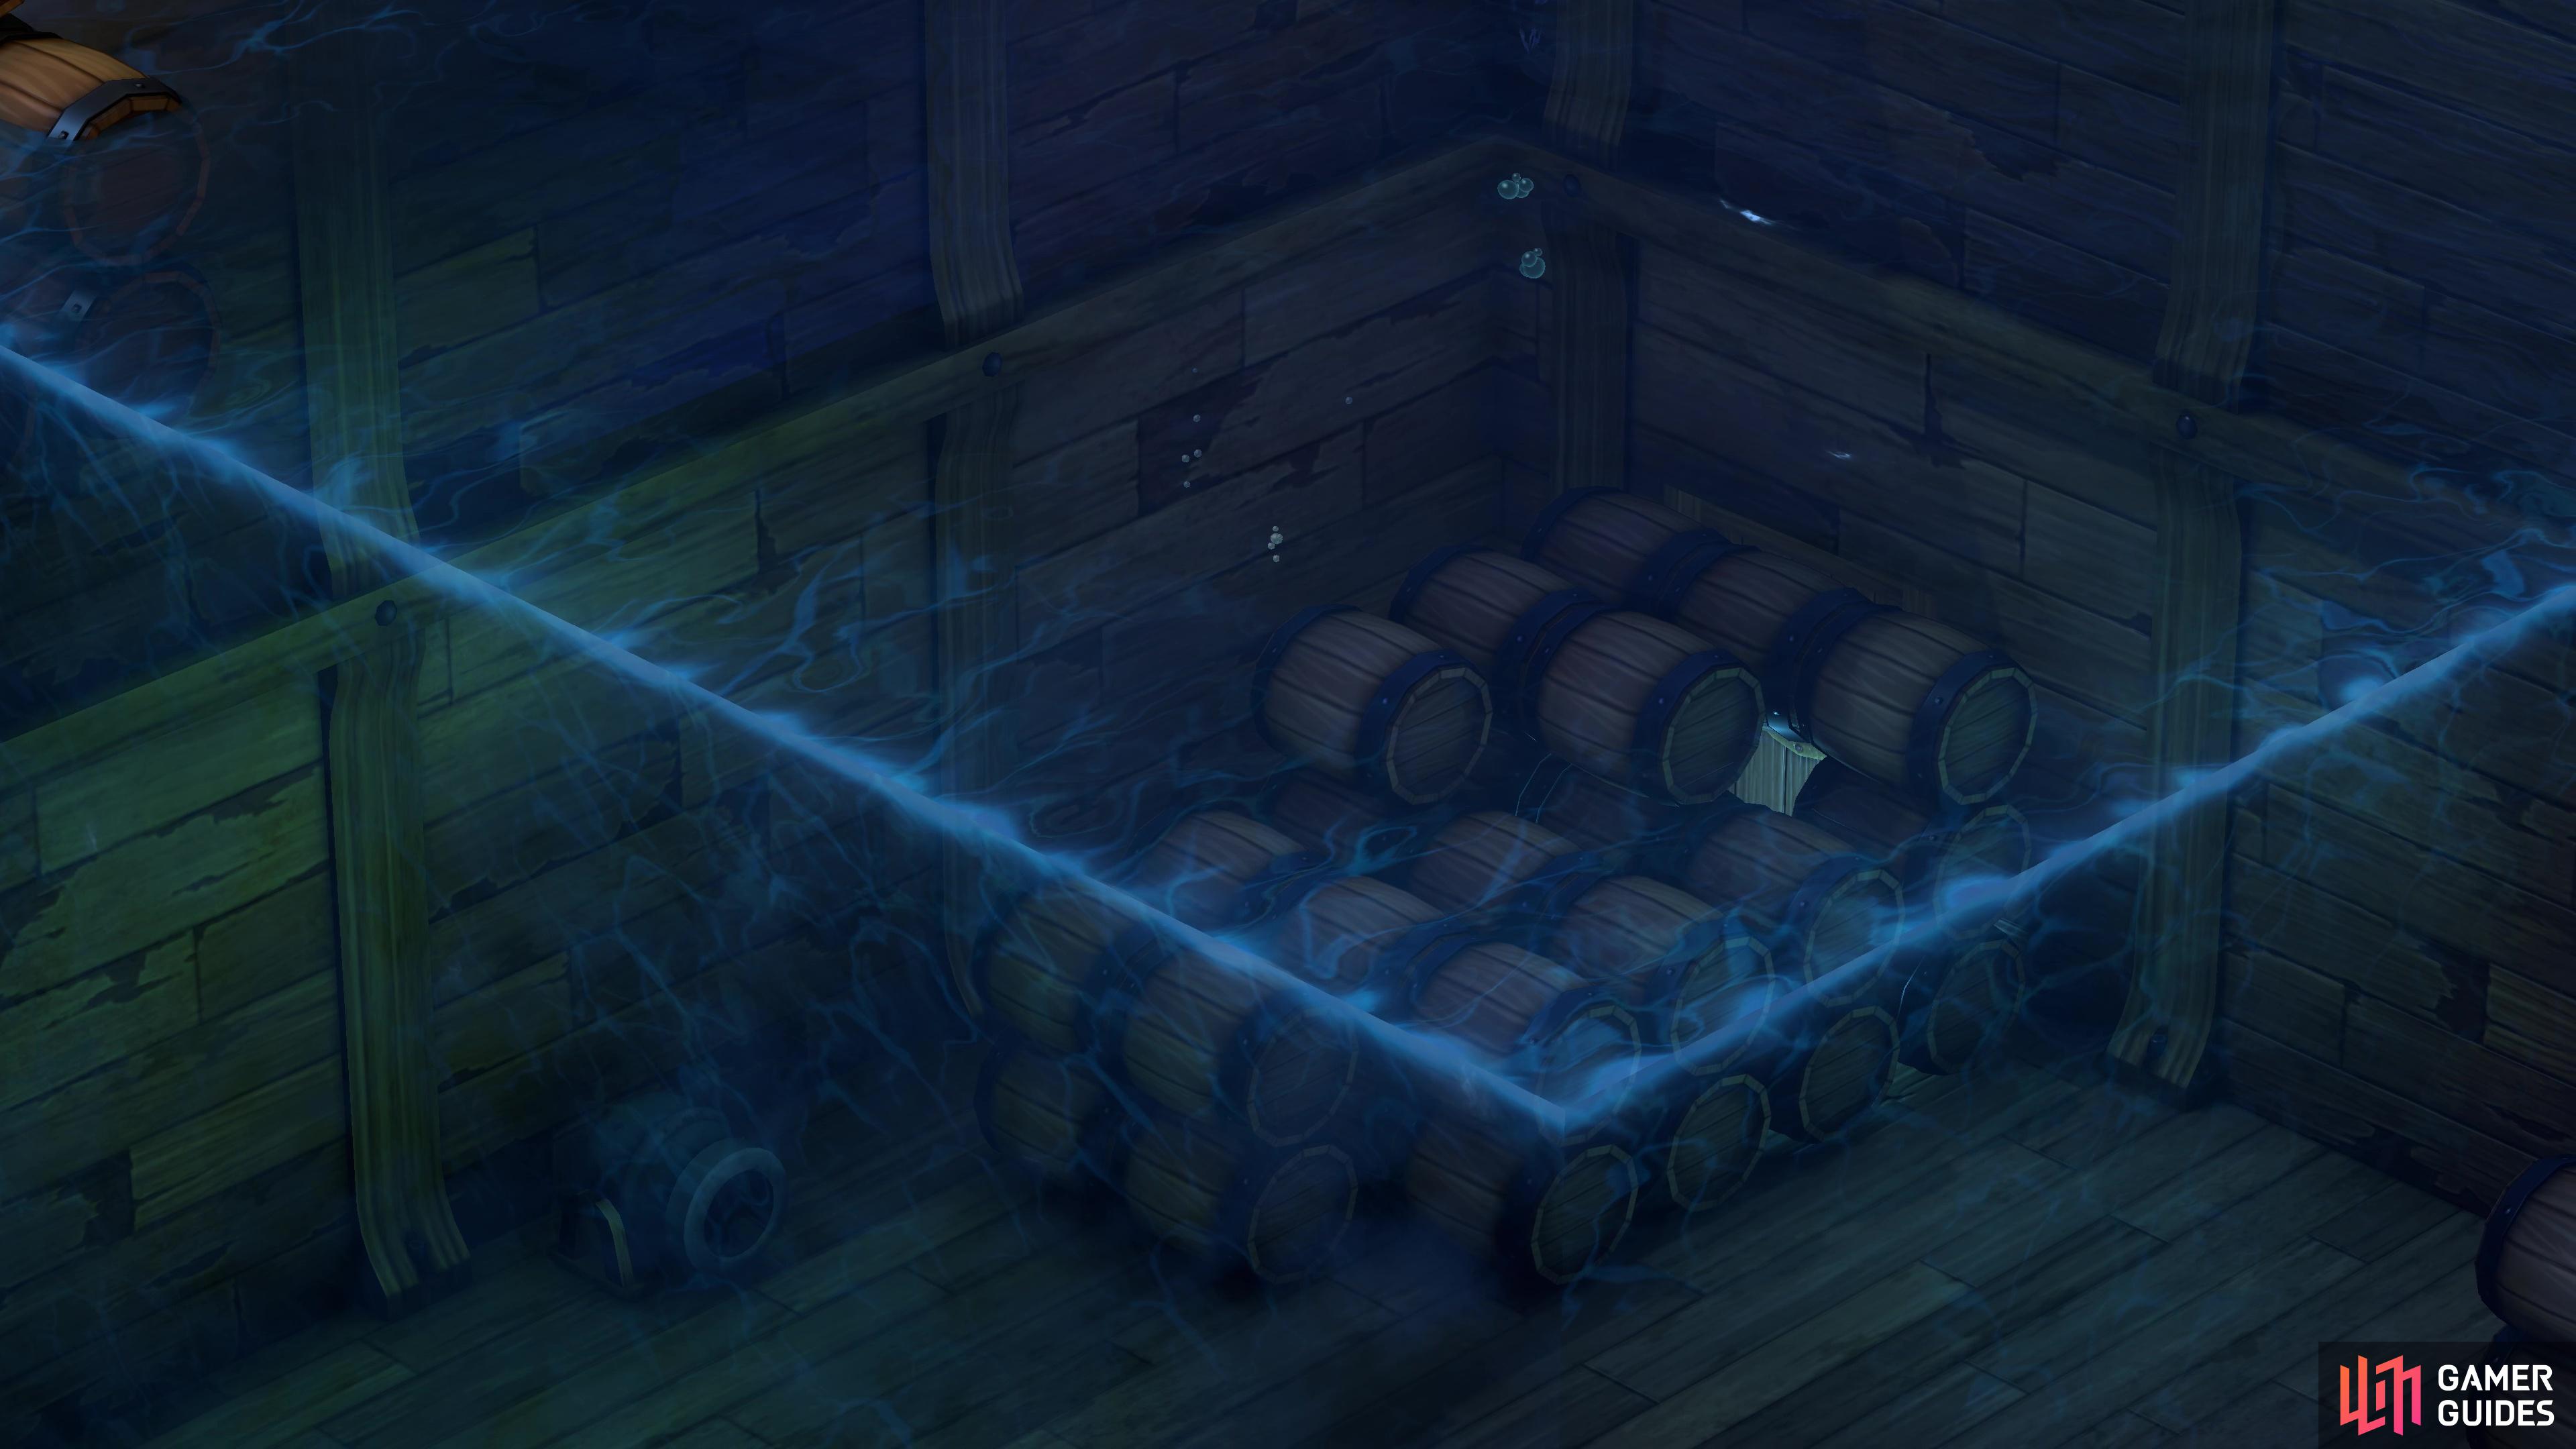 Head to the Sunken Ship and go behind these barrels